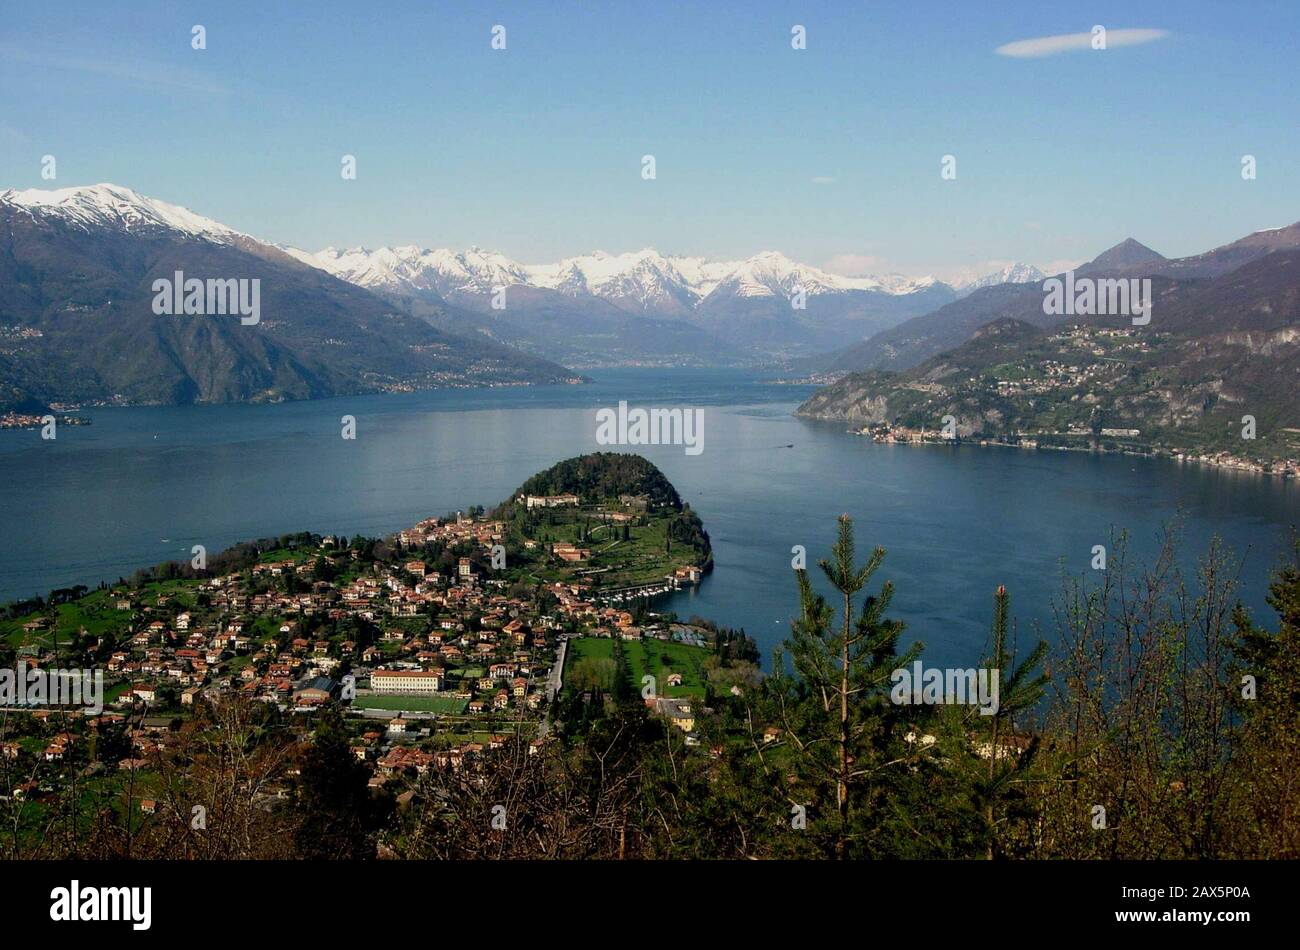 Lariano High Resolution Stock Photography and Images - Alamy